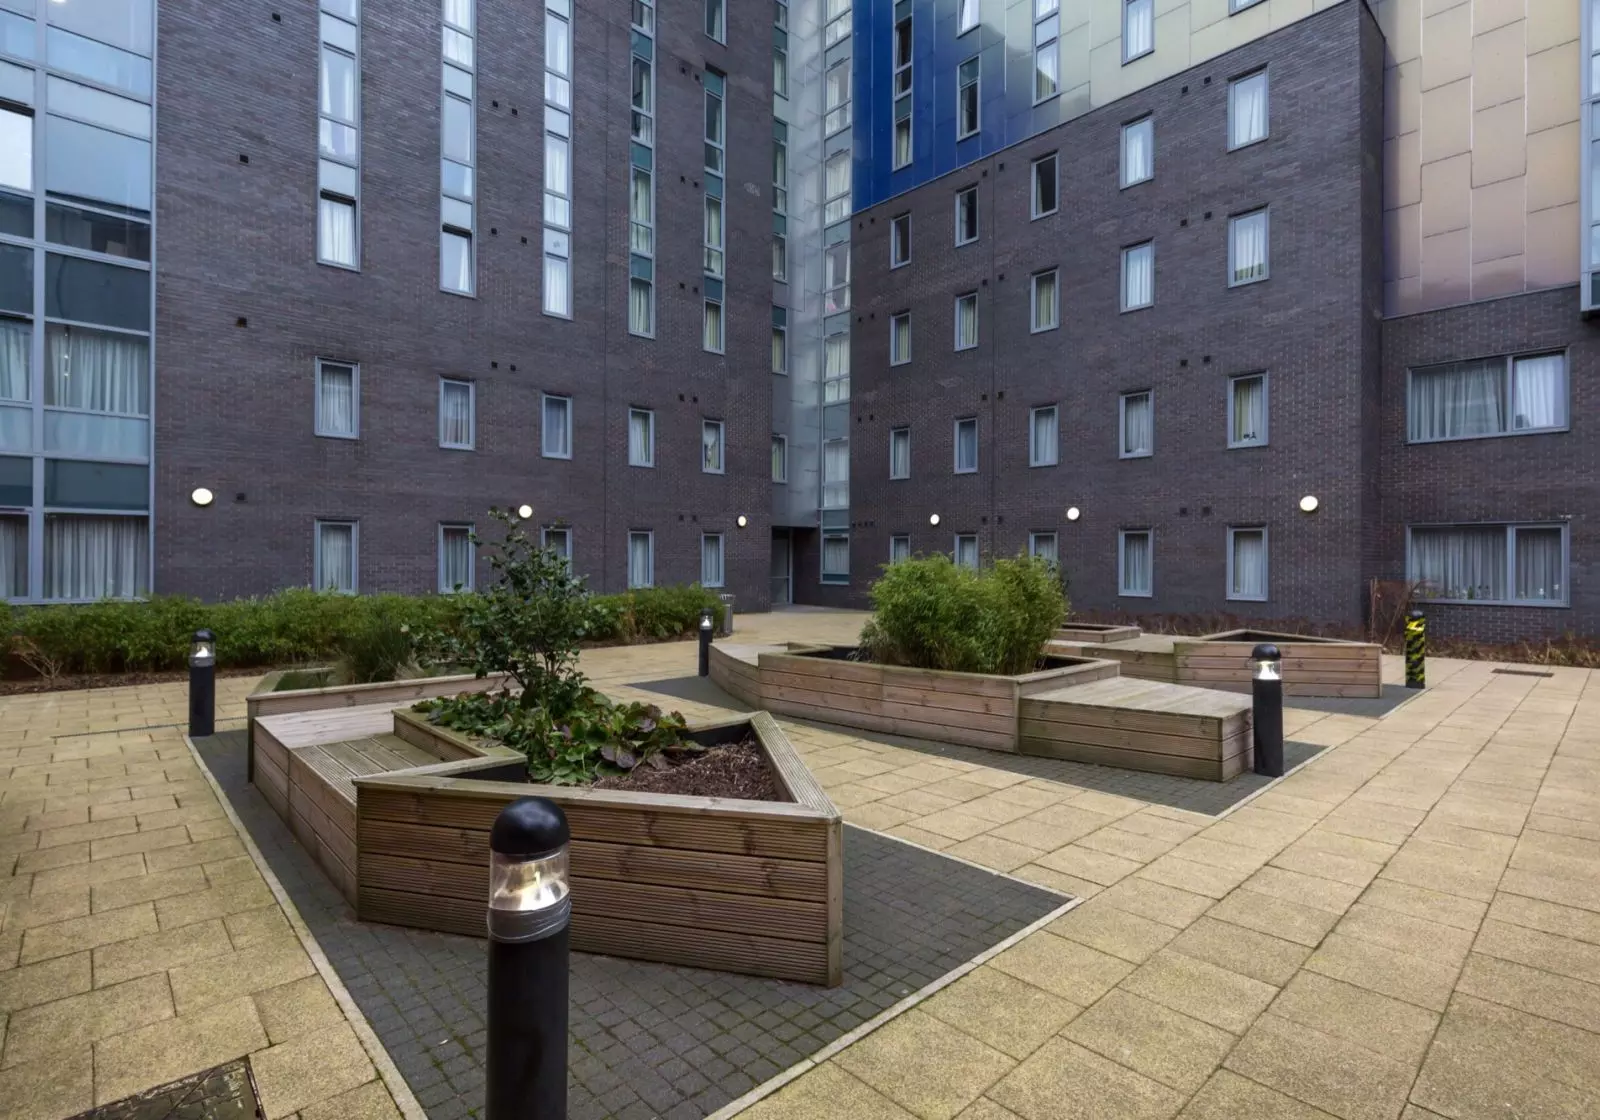 Study in Birmingham University Apartments: Comfortable and convenient student accommodation options